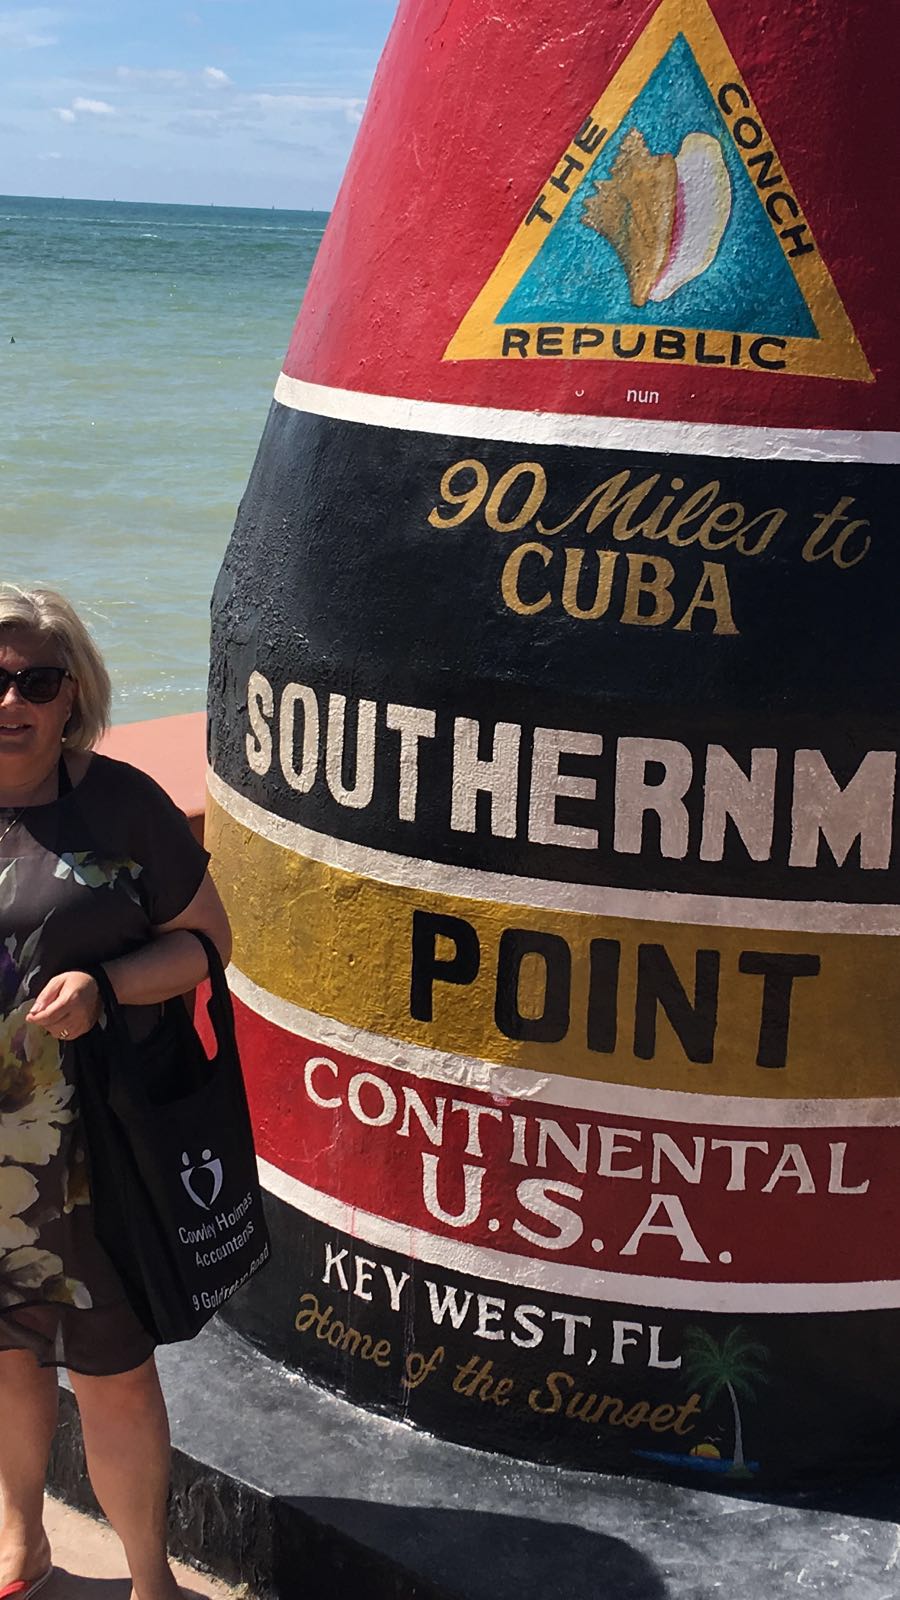 Southernmost-point-buoy-Key-West-Florida-Sept-16